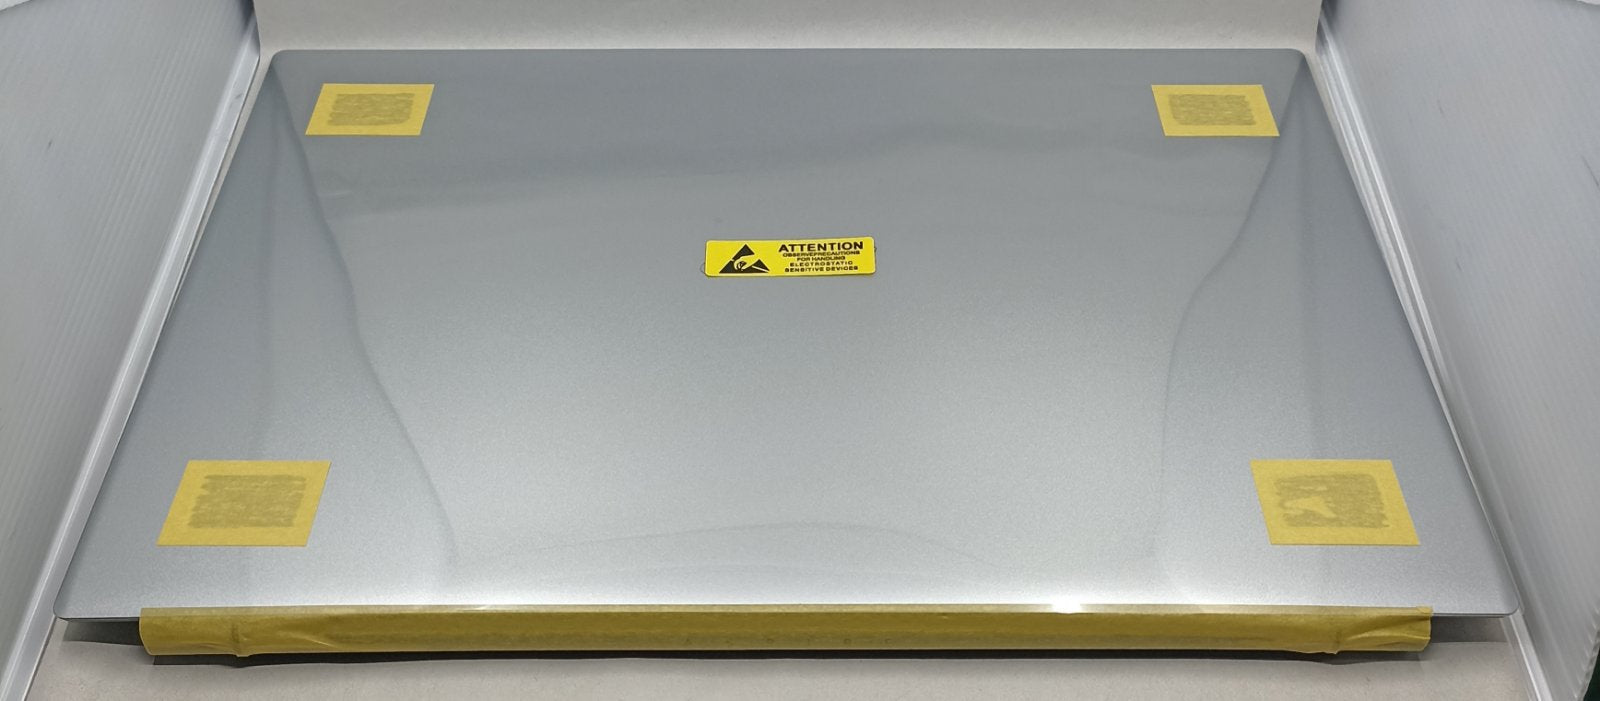 Replacement LCD Cover for Acer A315-58 WL